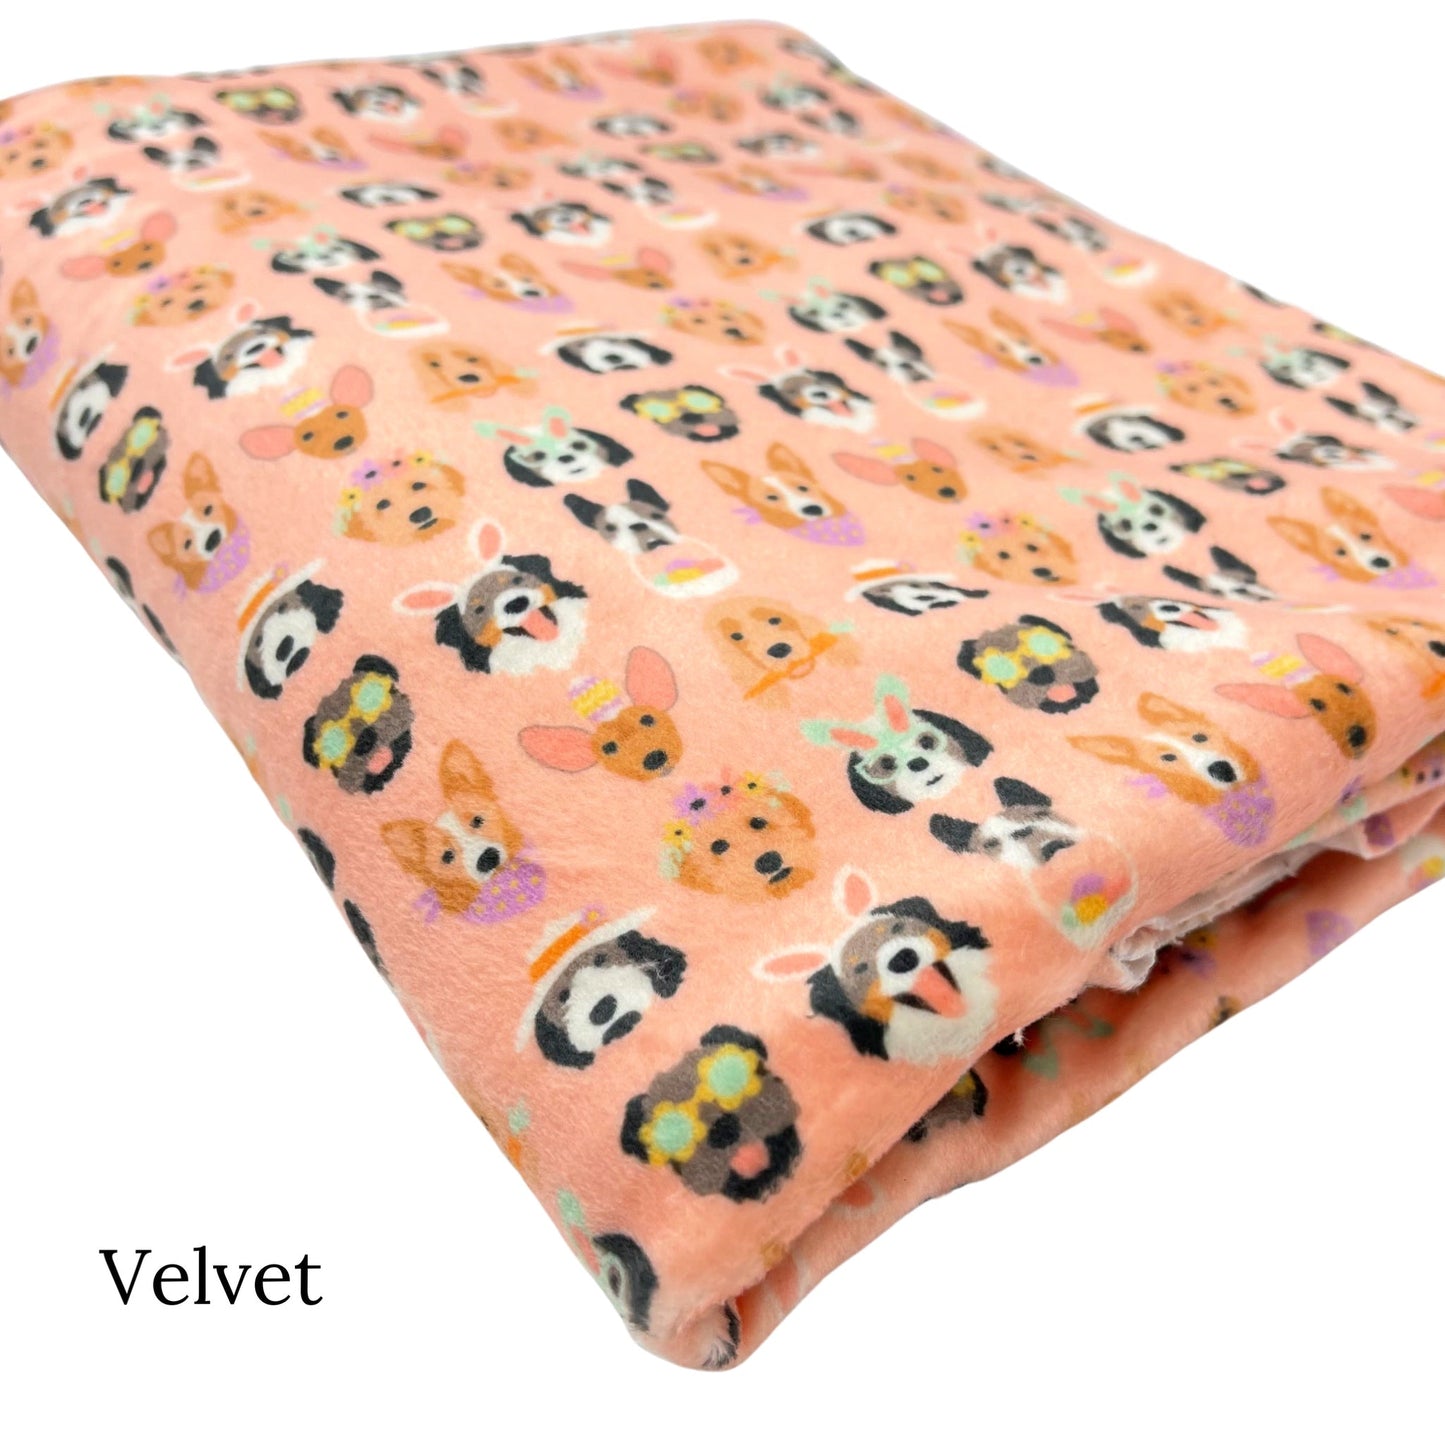 Folded light peachy pink Velvet fabric with Easter dogs pattern designed by Hey Cute Design.